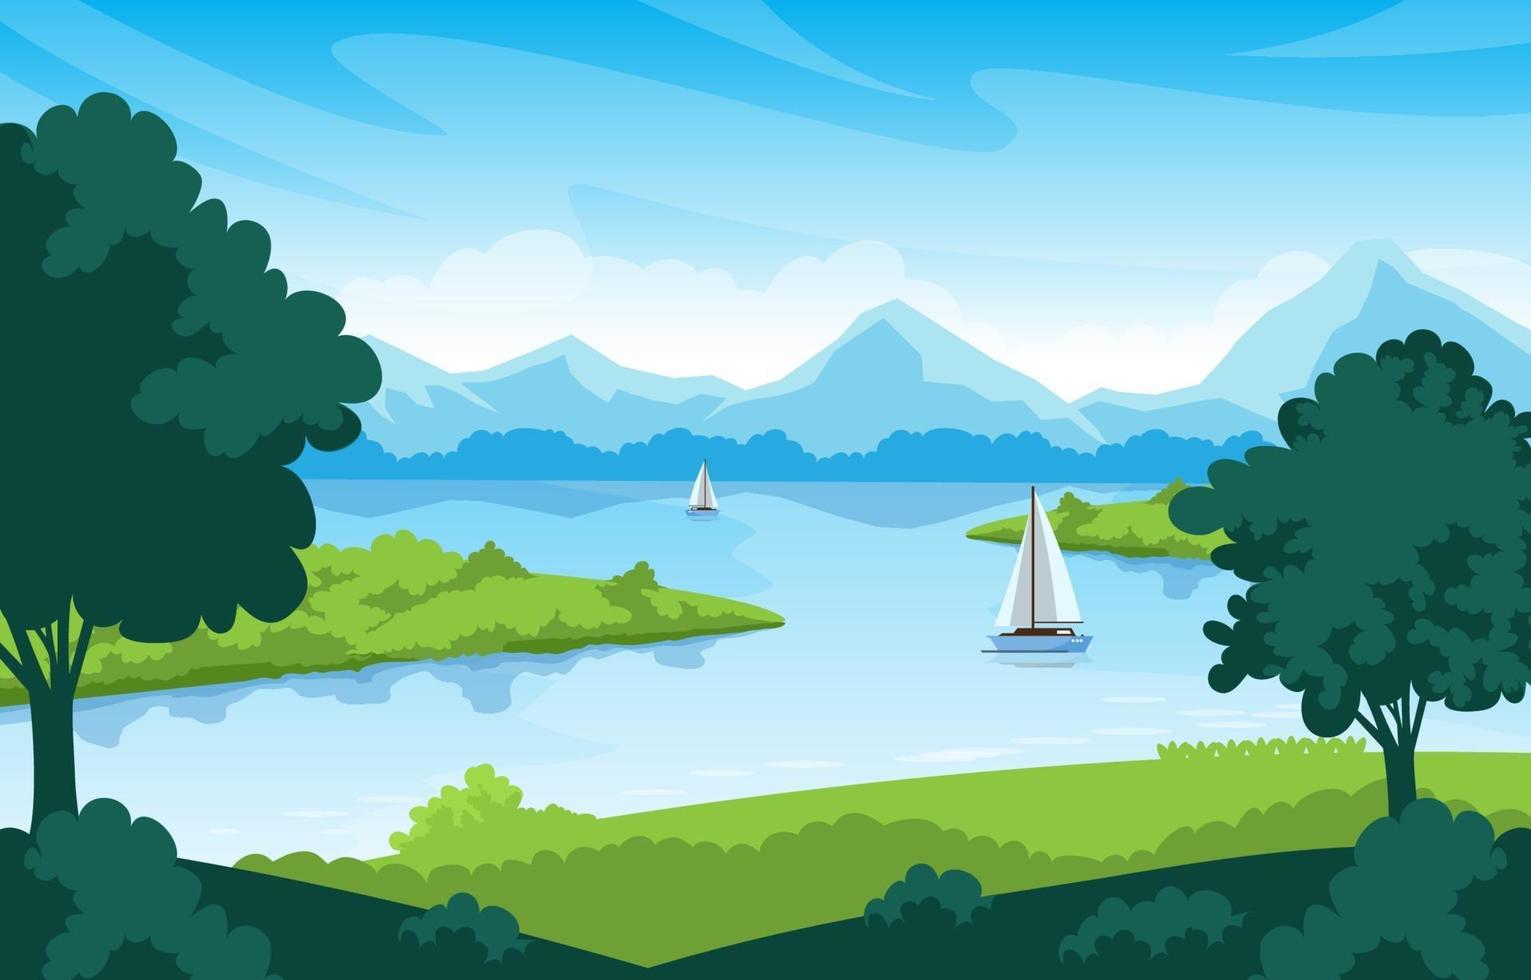 Scenery of a Lake and Nature Landscape vector